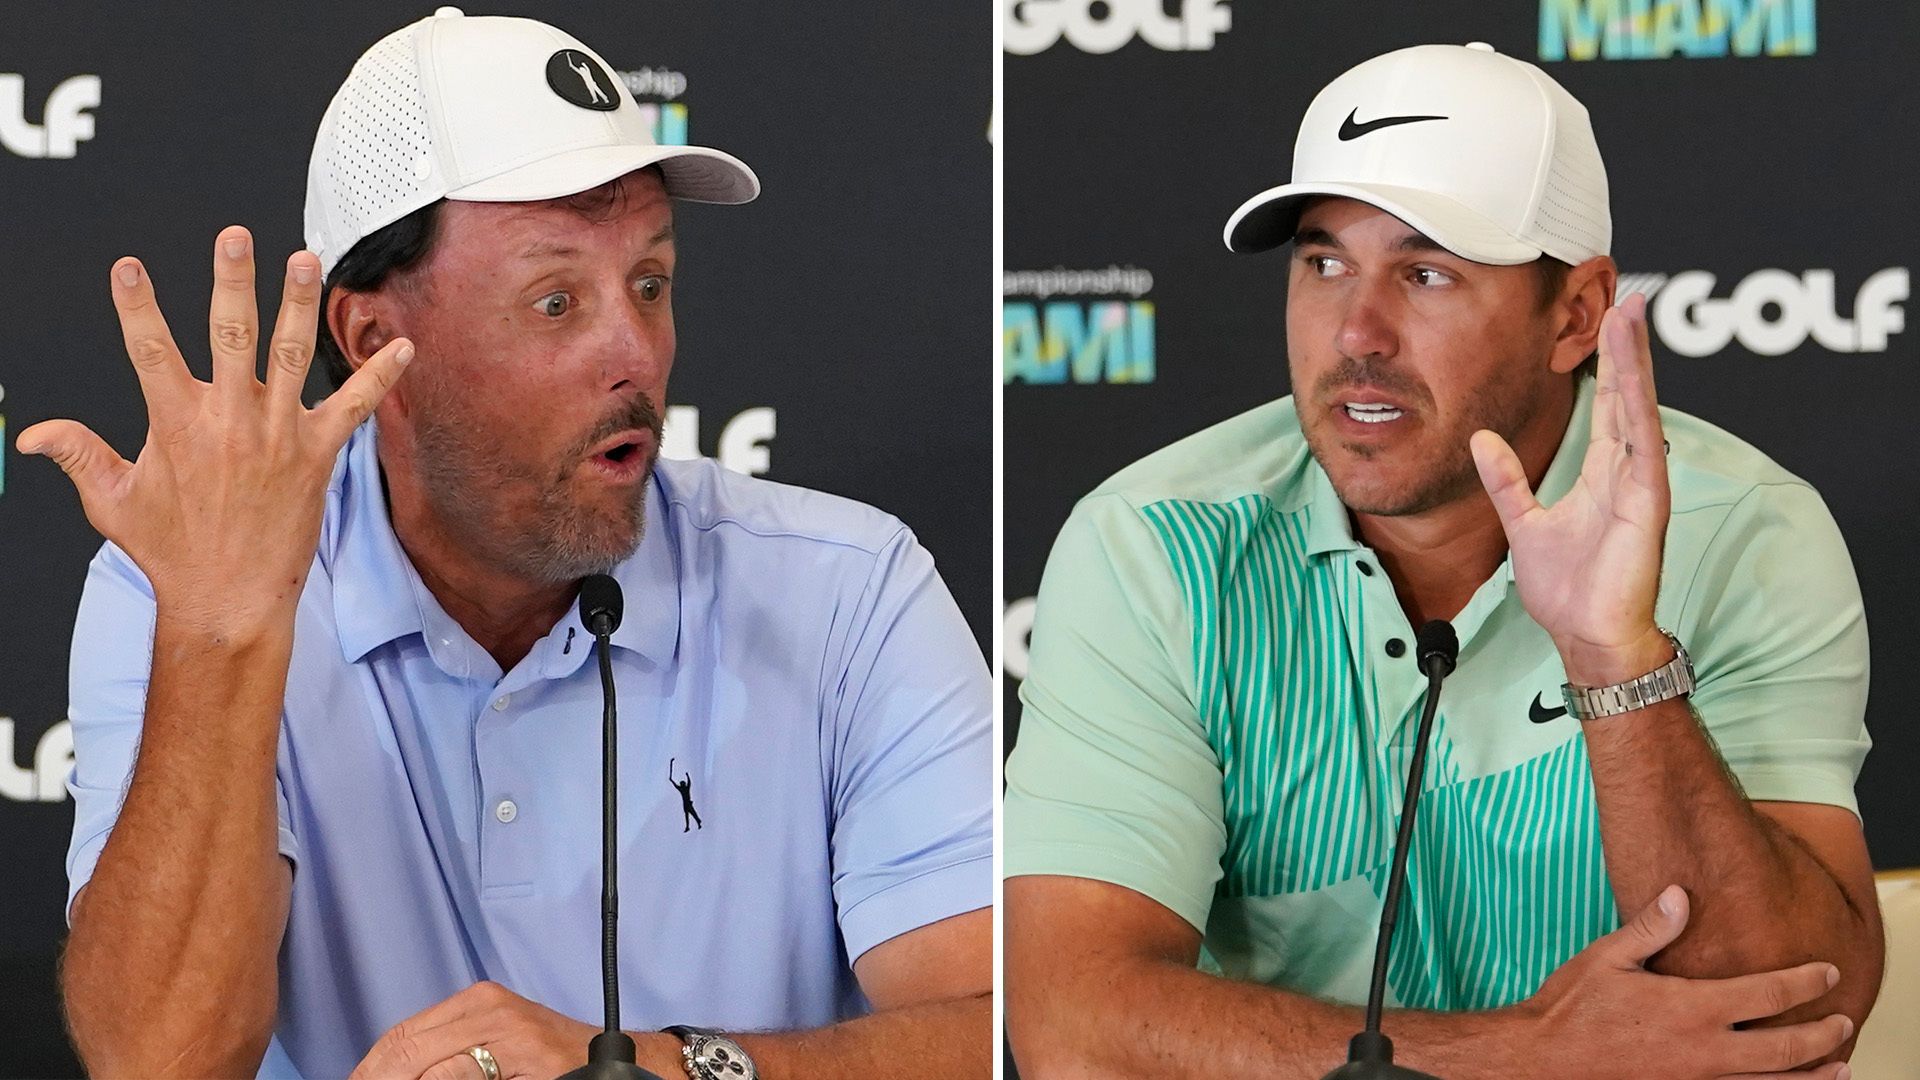 'Do you have a Green Jacket!?'| Koepka and Mickelson's heated exchange!